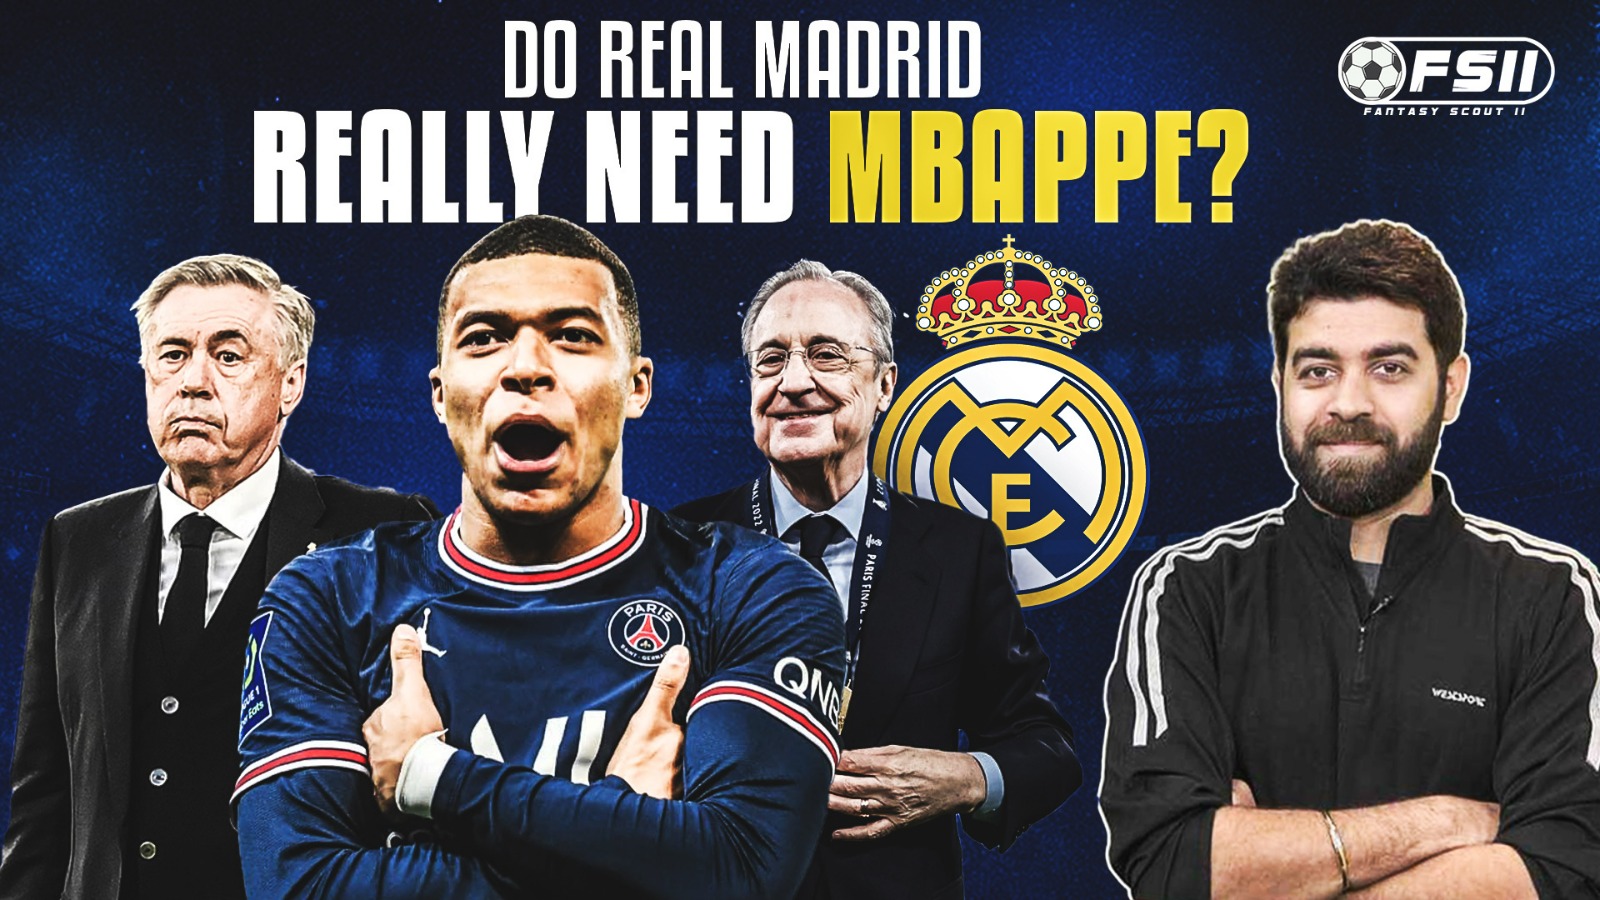 Do Real Madrid Really Need Mbappe?